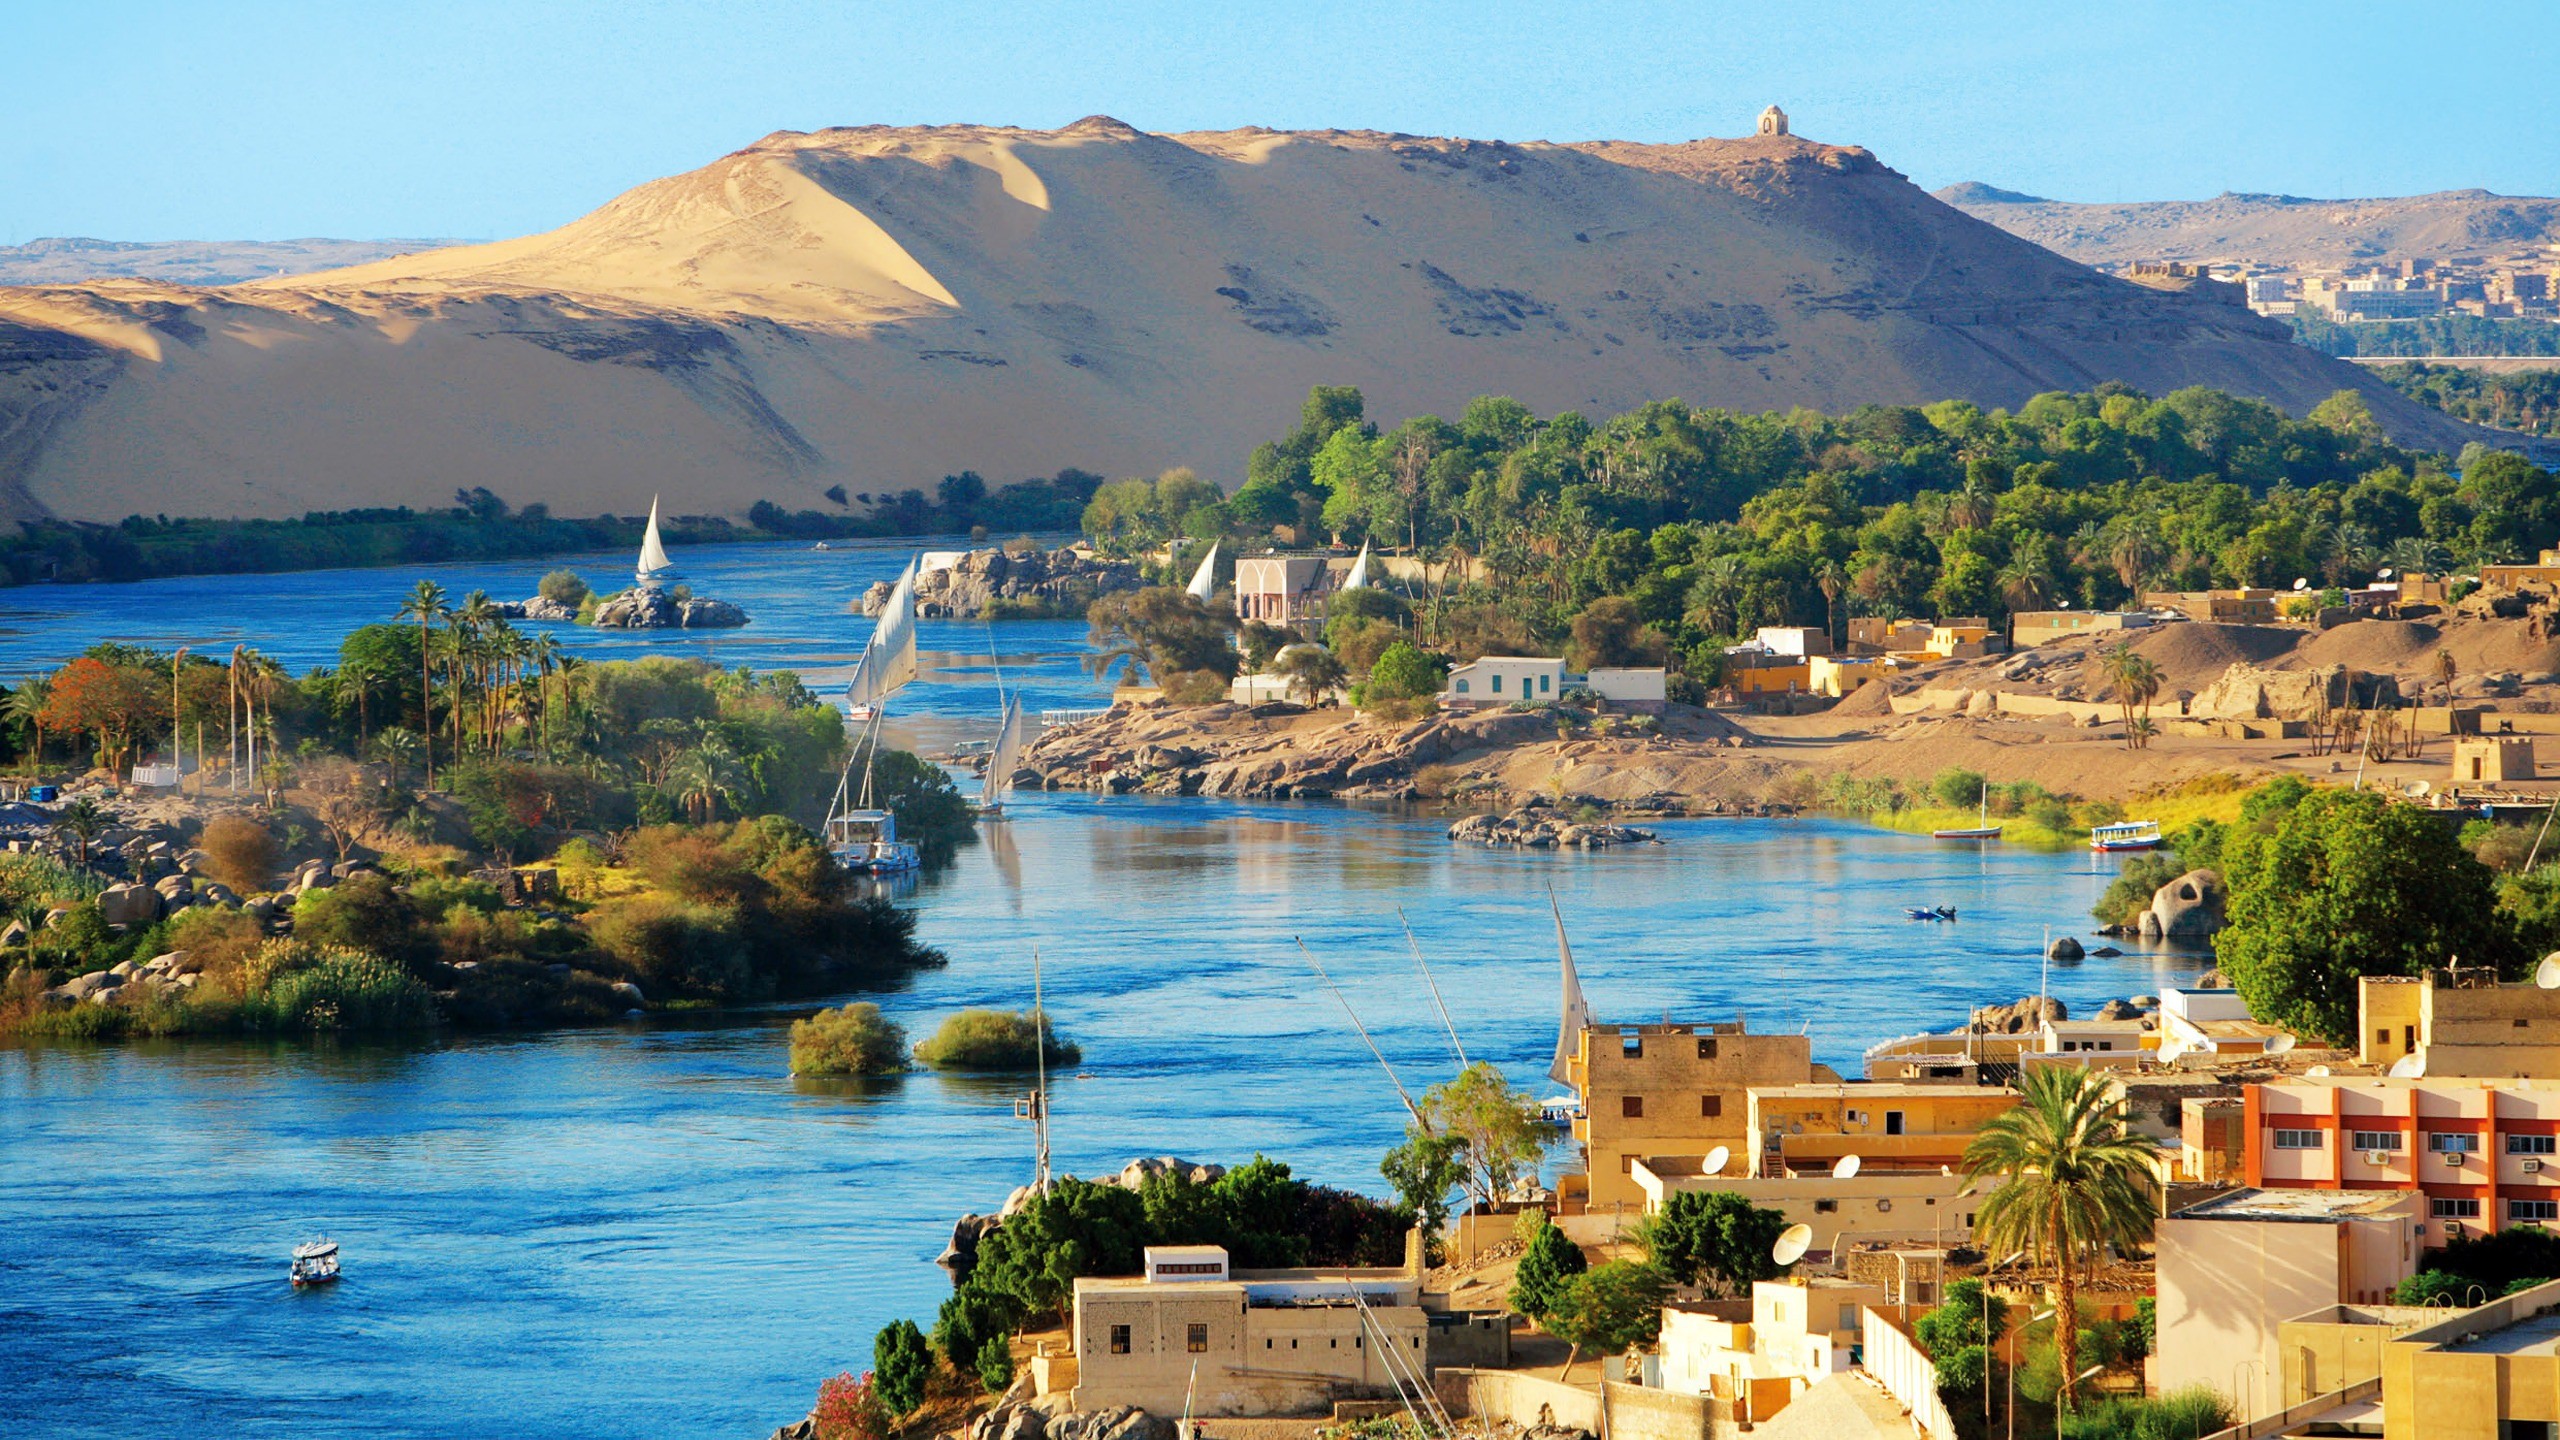 nile wallpaper,body of water,natural landscape,coast,tourism,town